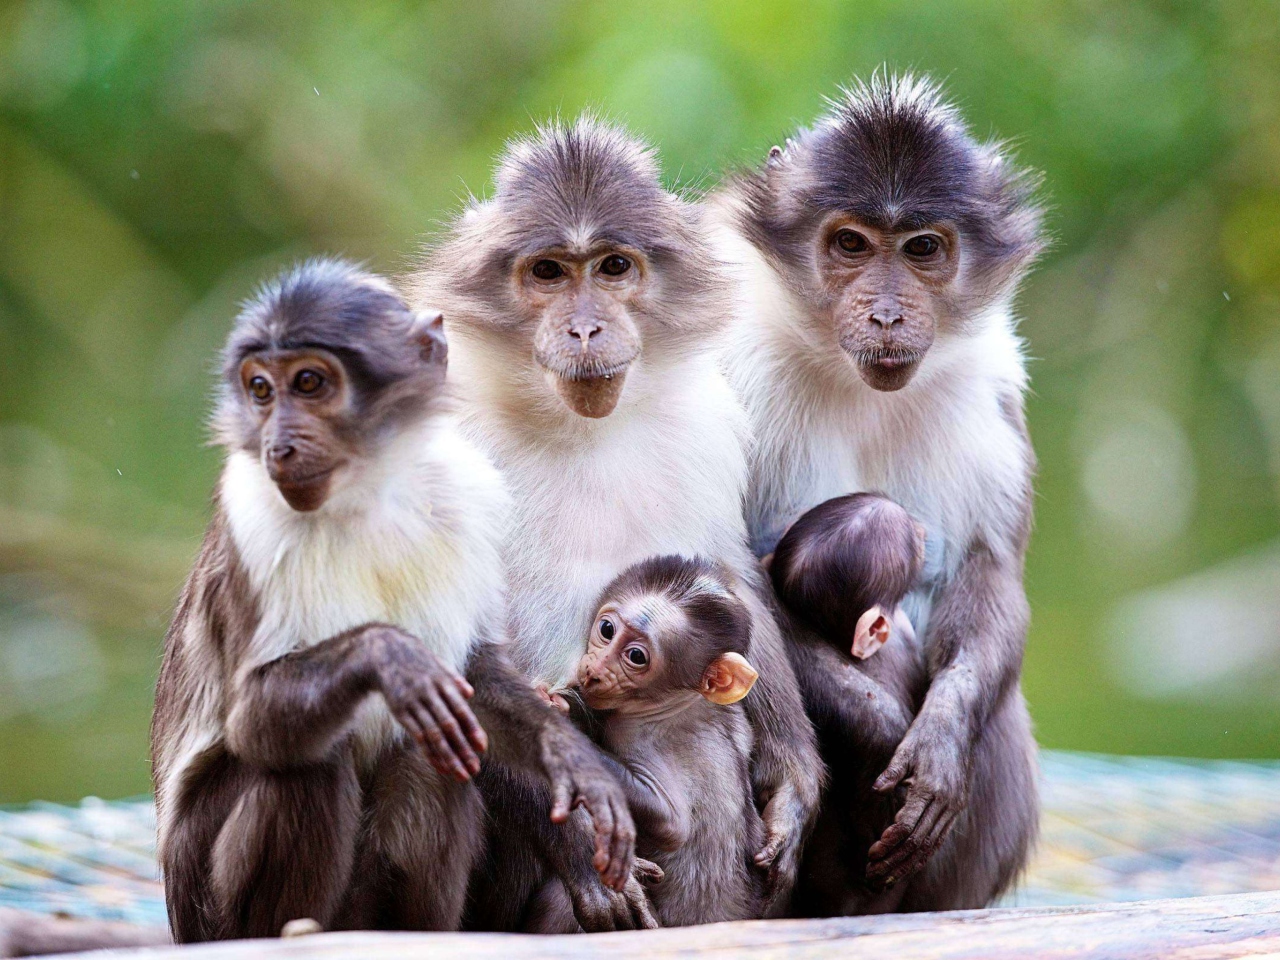 Funny Monkeys With Their Babies wallpaper 1280x960